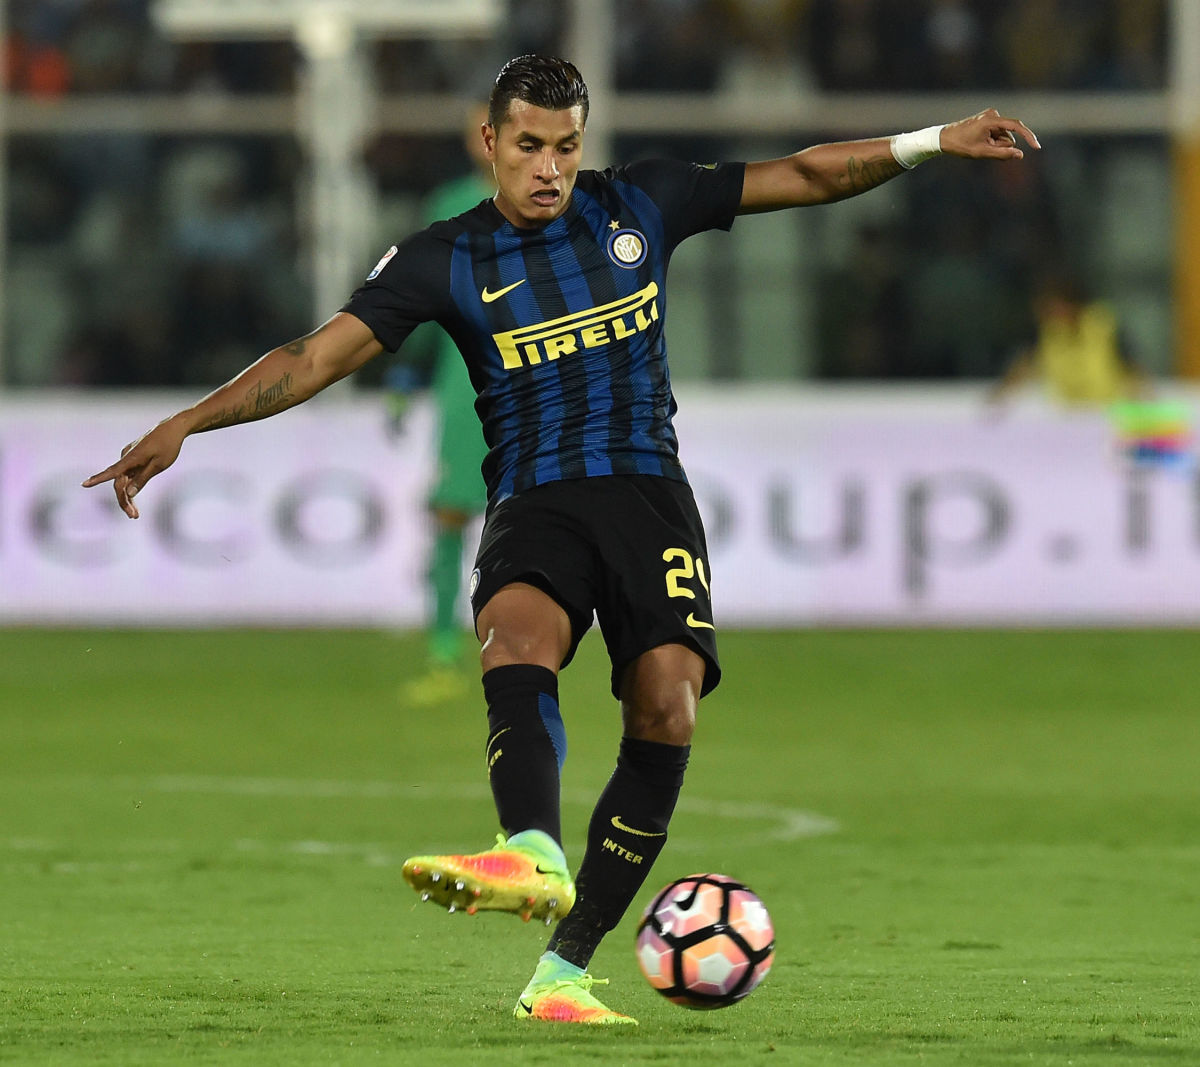 PESCARA, ITALY - SEPTEMBER 11:  Jeison Murillo of FC Internazionale in action during the Serie A match between Pescara Calcio and FC Internazionale at Adriatico Stadium on September 11, 2016 in Pescara, Italy.  (Photo by Giuseppe Bellini/Getty Images)